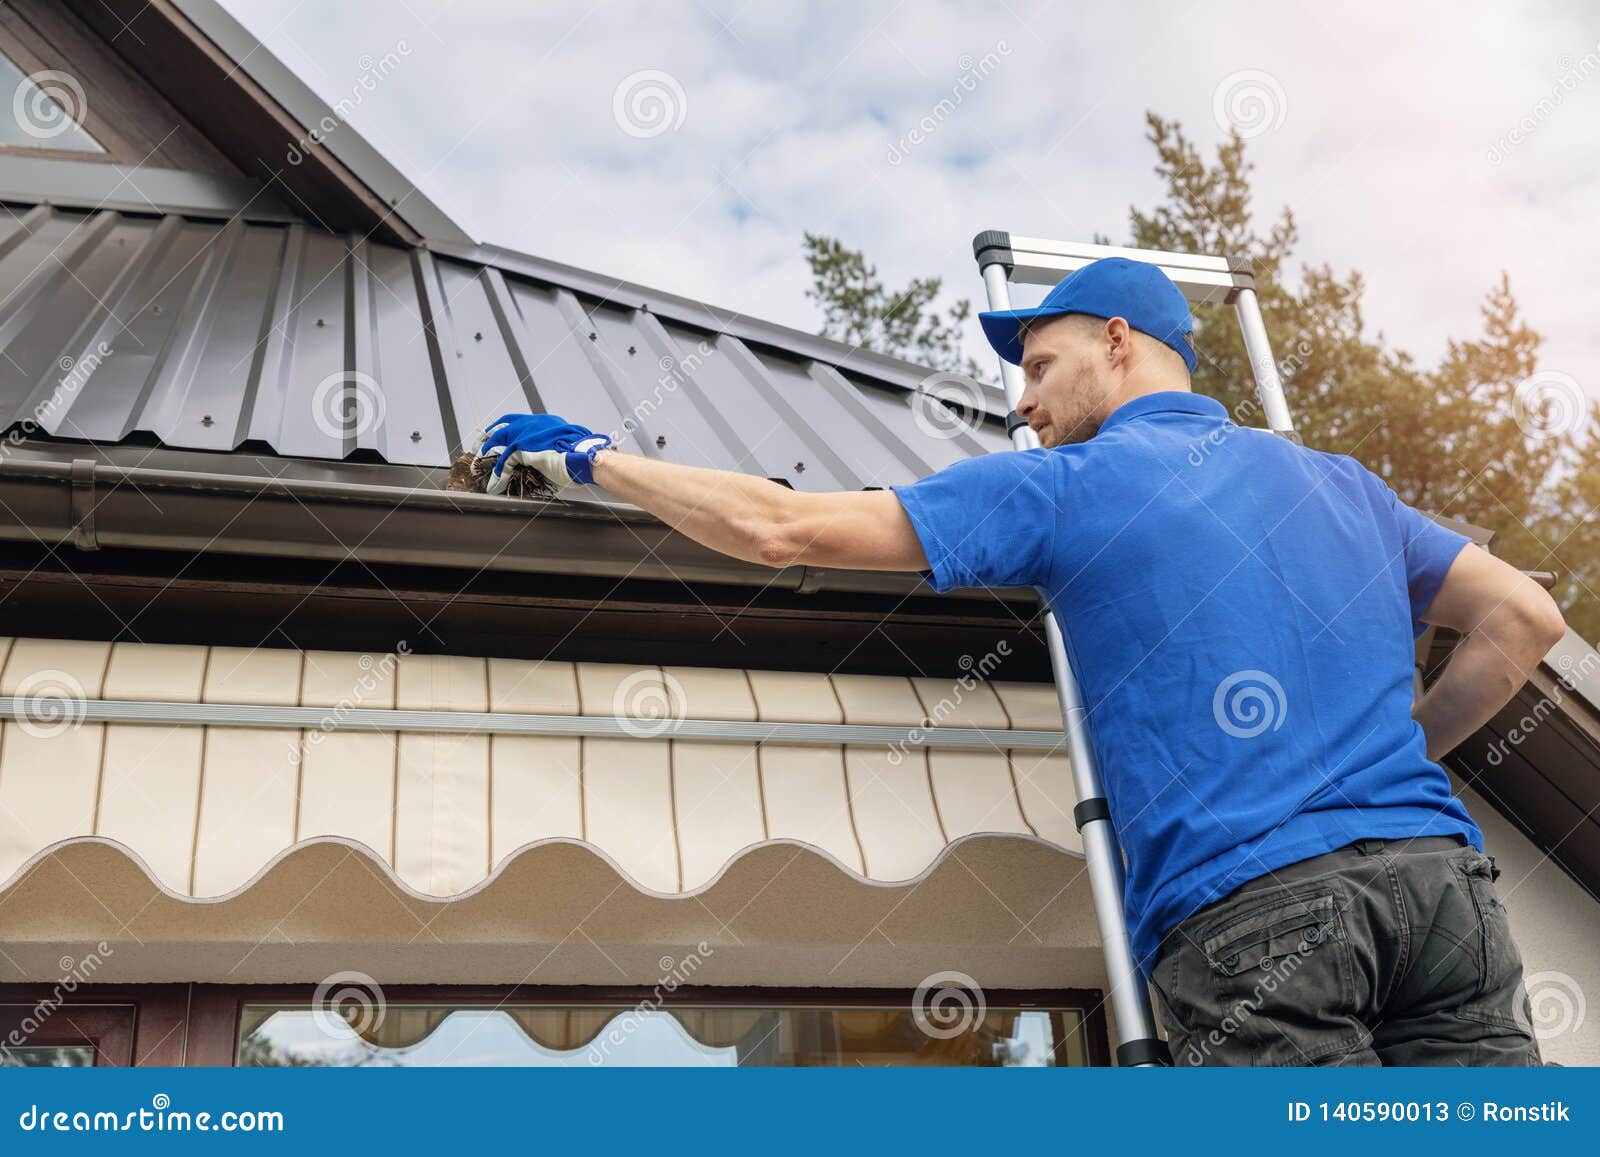 man standing on ladder and cleaning roof rain gutter